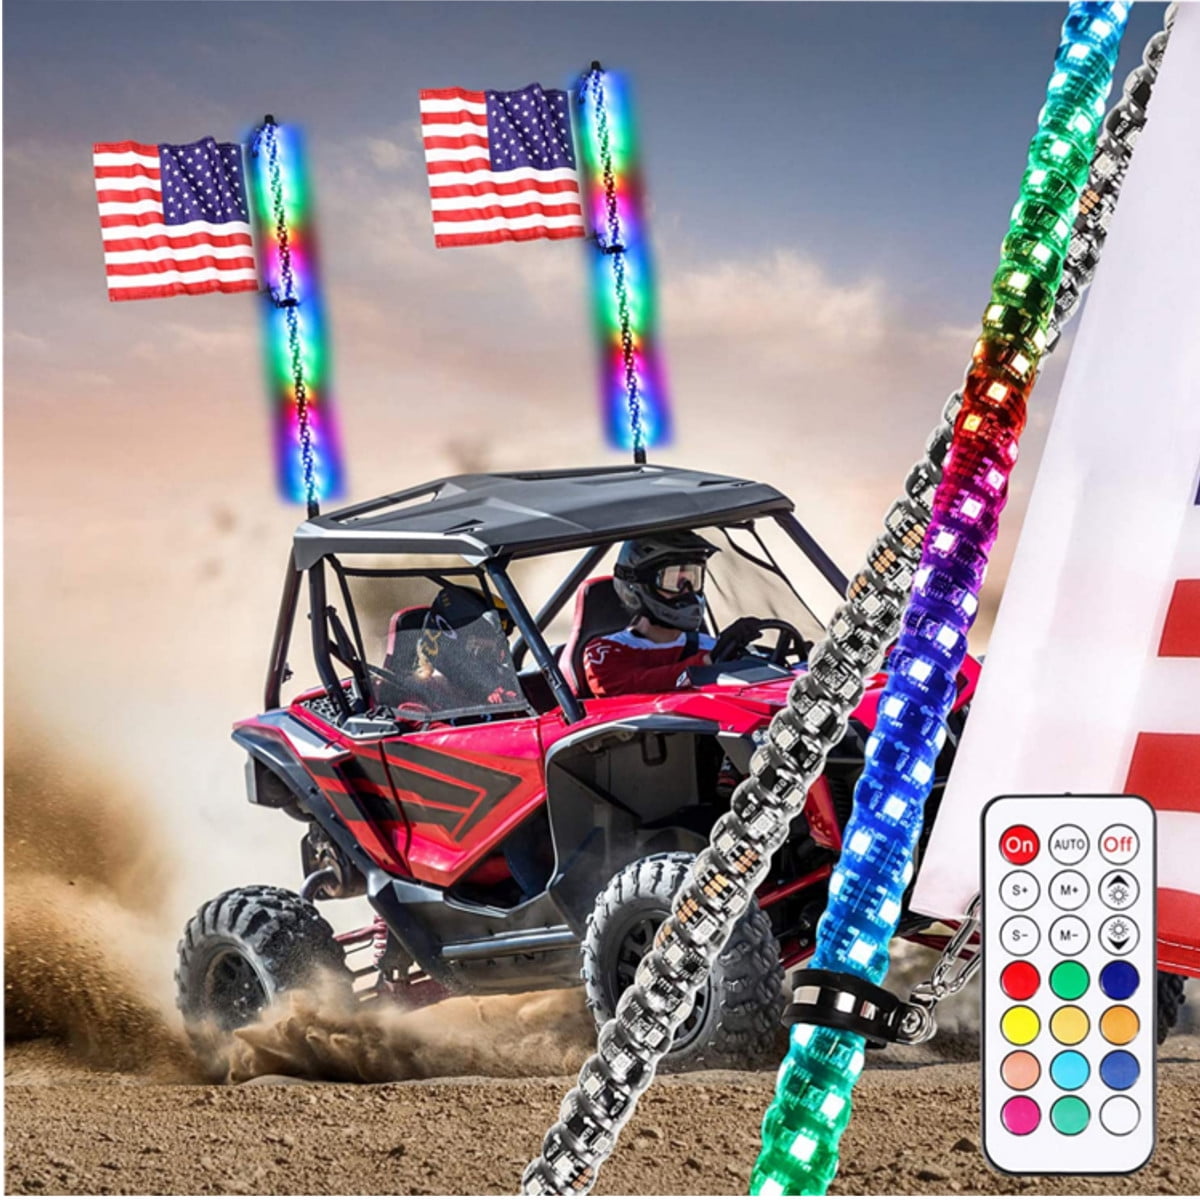 with Flag for UTV ATV Jeep Truck 4X4 SXS Buggy Dune 5ft Recoil Single 5ft Spiral Lighted RGB LED Dancing/Chasing Whip Light with Smartphone App and RF Controller 